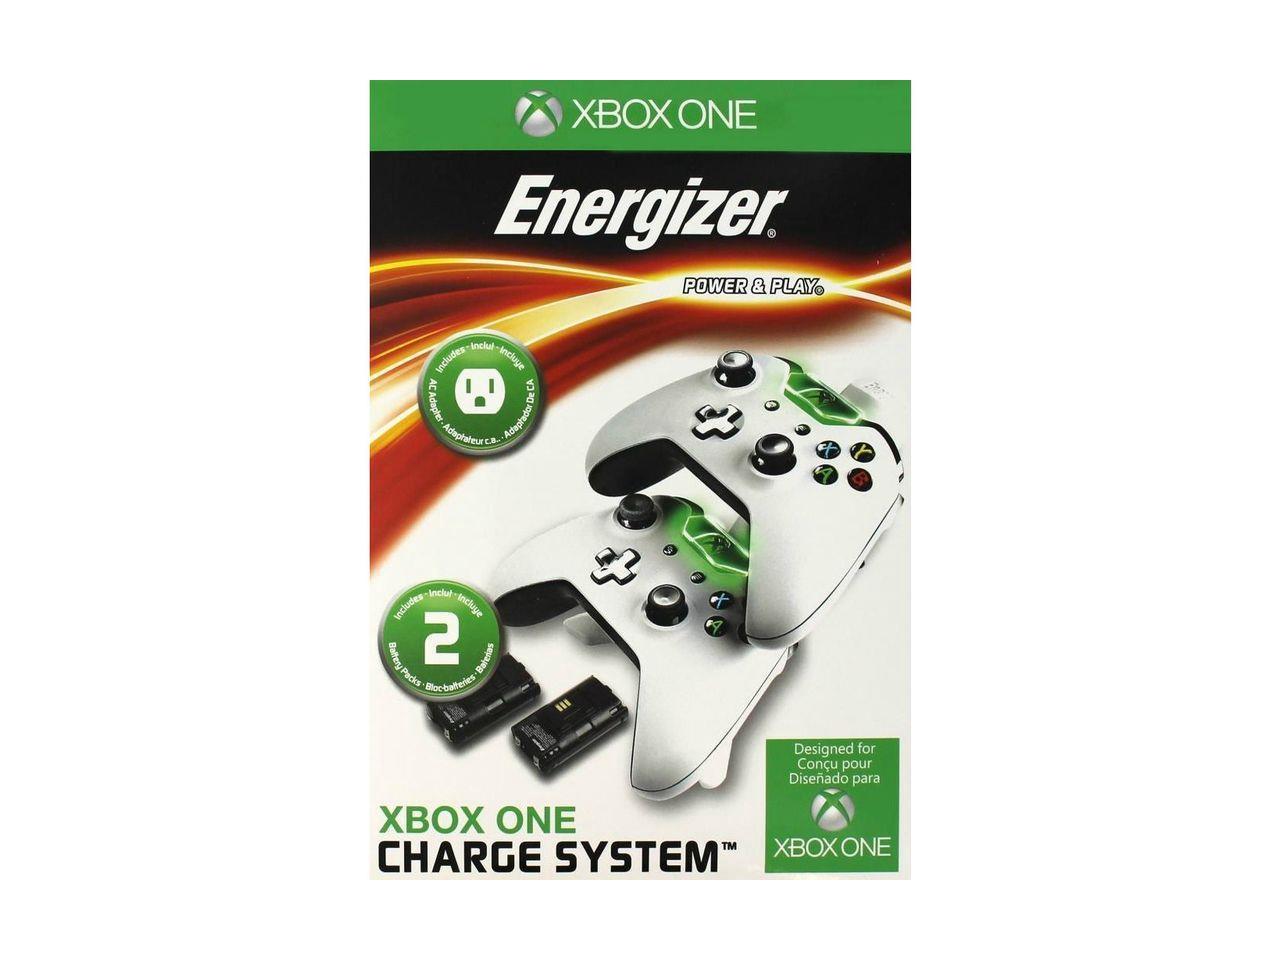 ps4 energizer dual charger